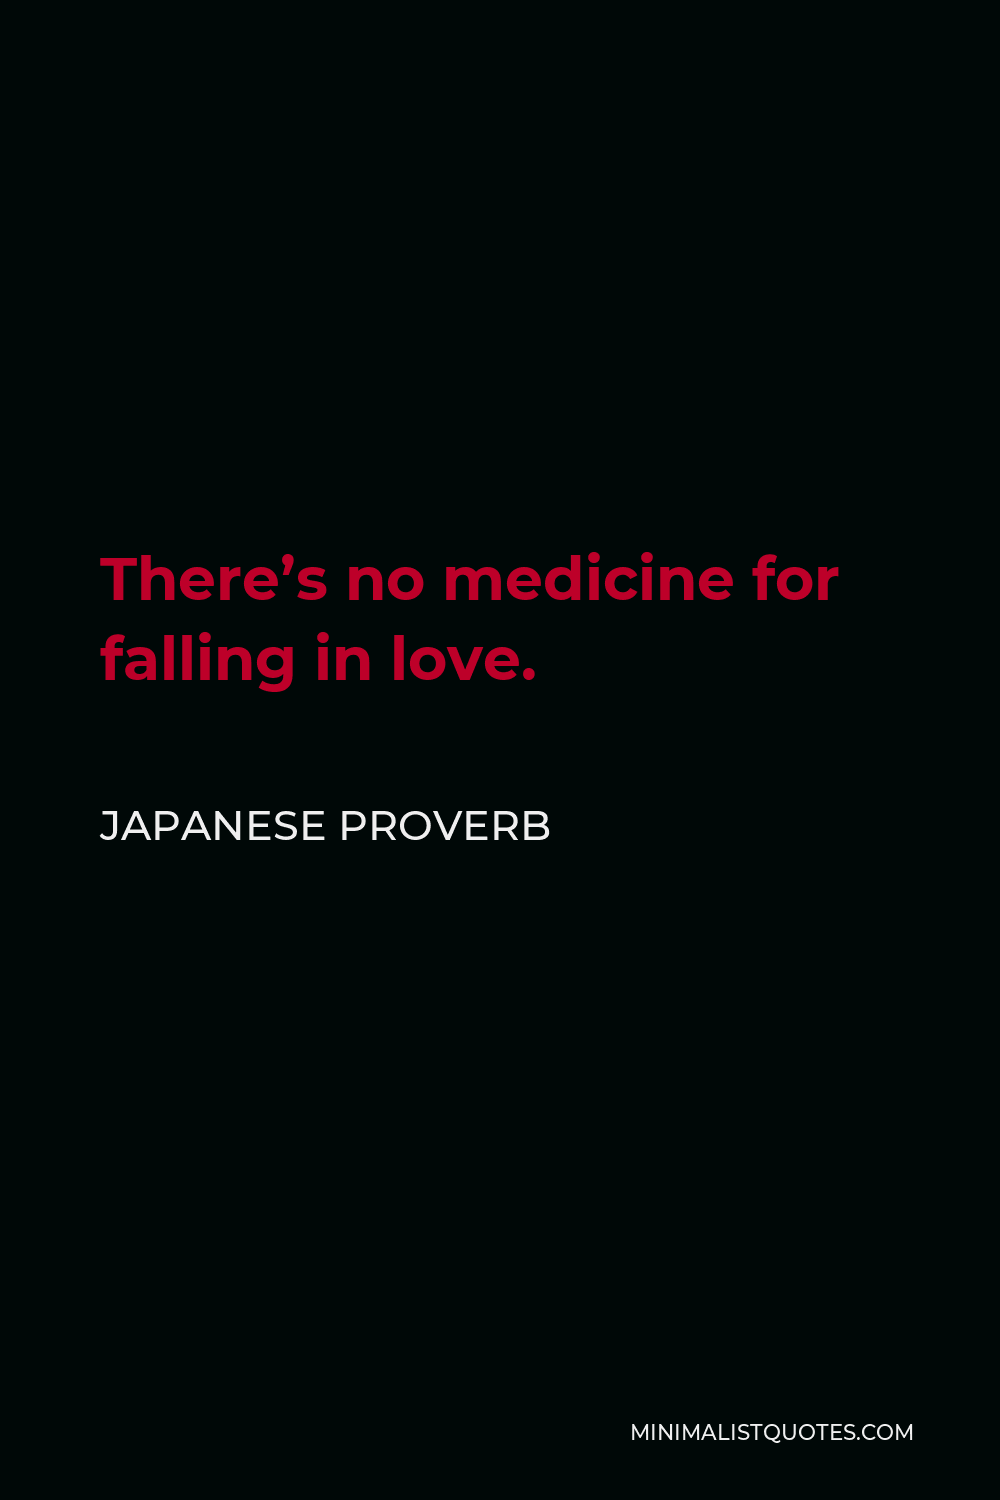 Japanese Proverb Quote - There’s no medicine for falling in love.